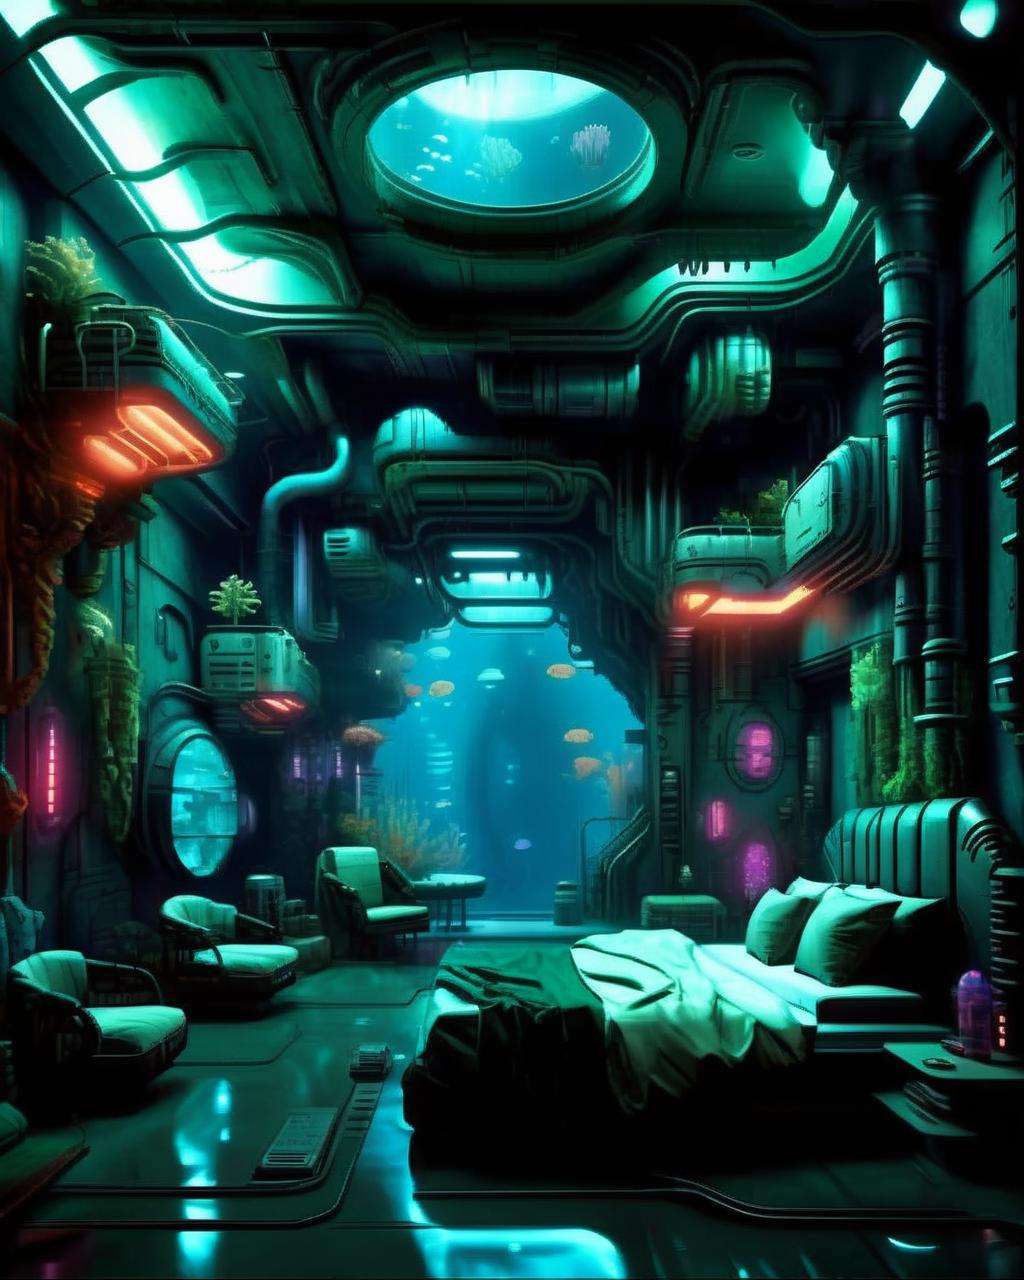 (a cyberpunk interior design ), Subterranean hydroplex, an underwater colony with bioluminescent coral gardens and pressurized domes. , cyberpunk style environment <lora:Cyber_Background_sdxl:1.0>